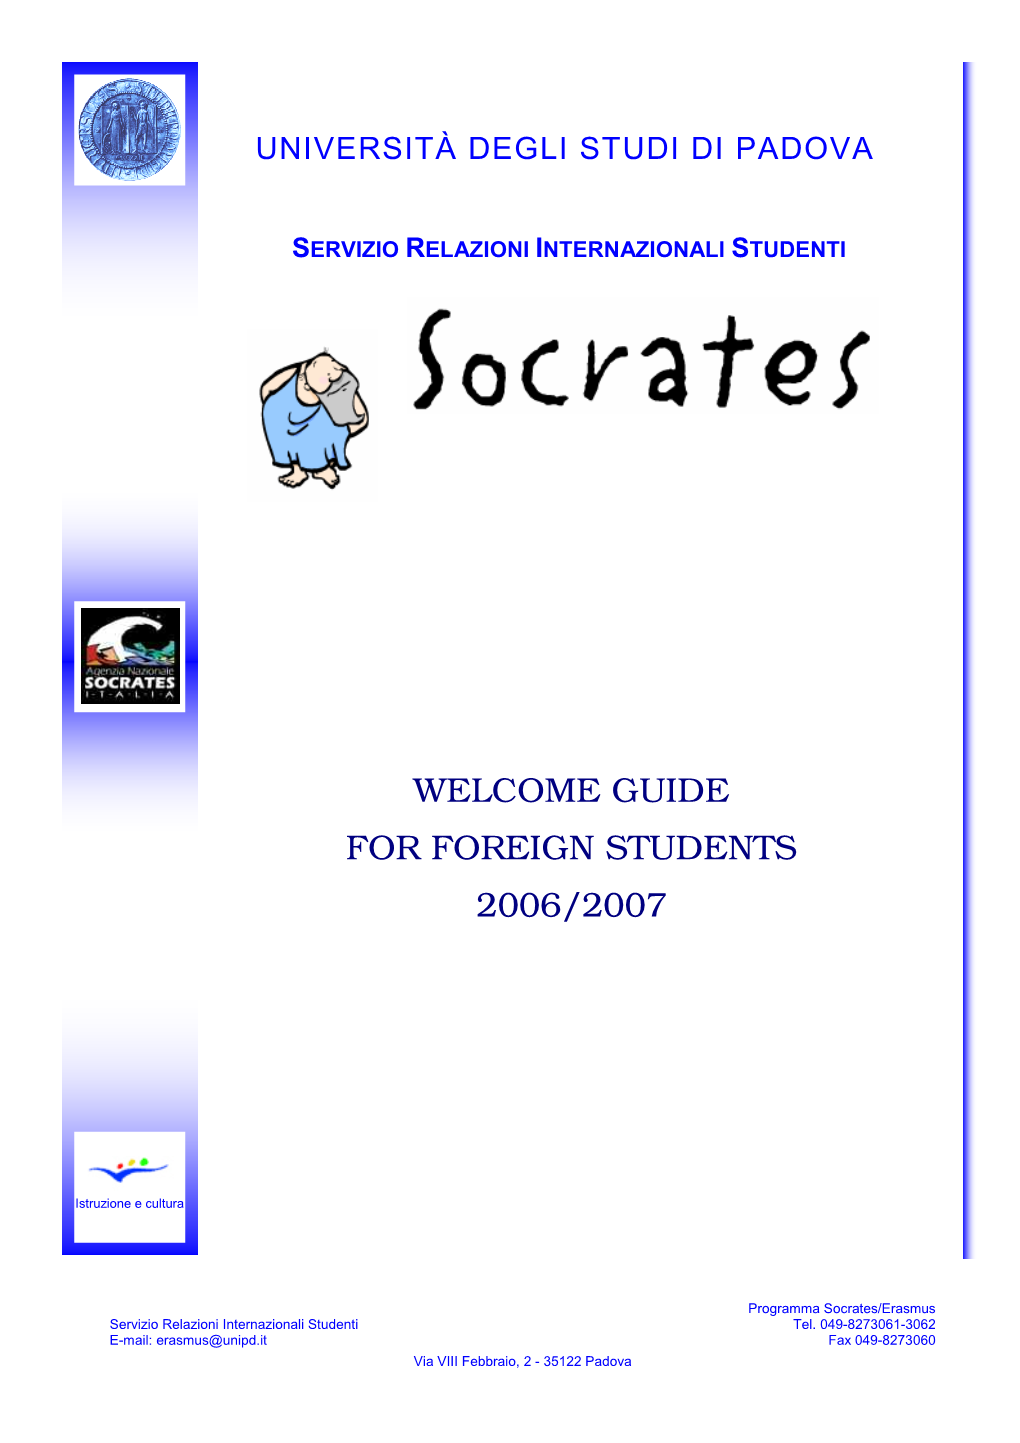 Welcome Guide for Foreign Students 2006/2007